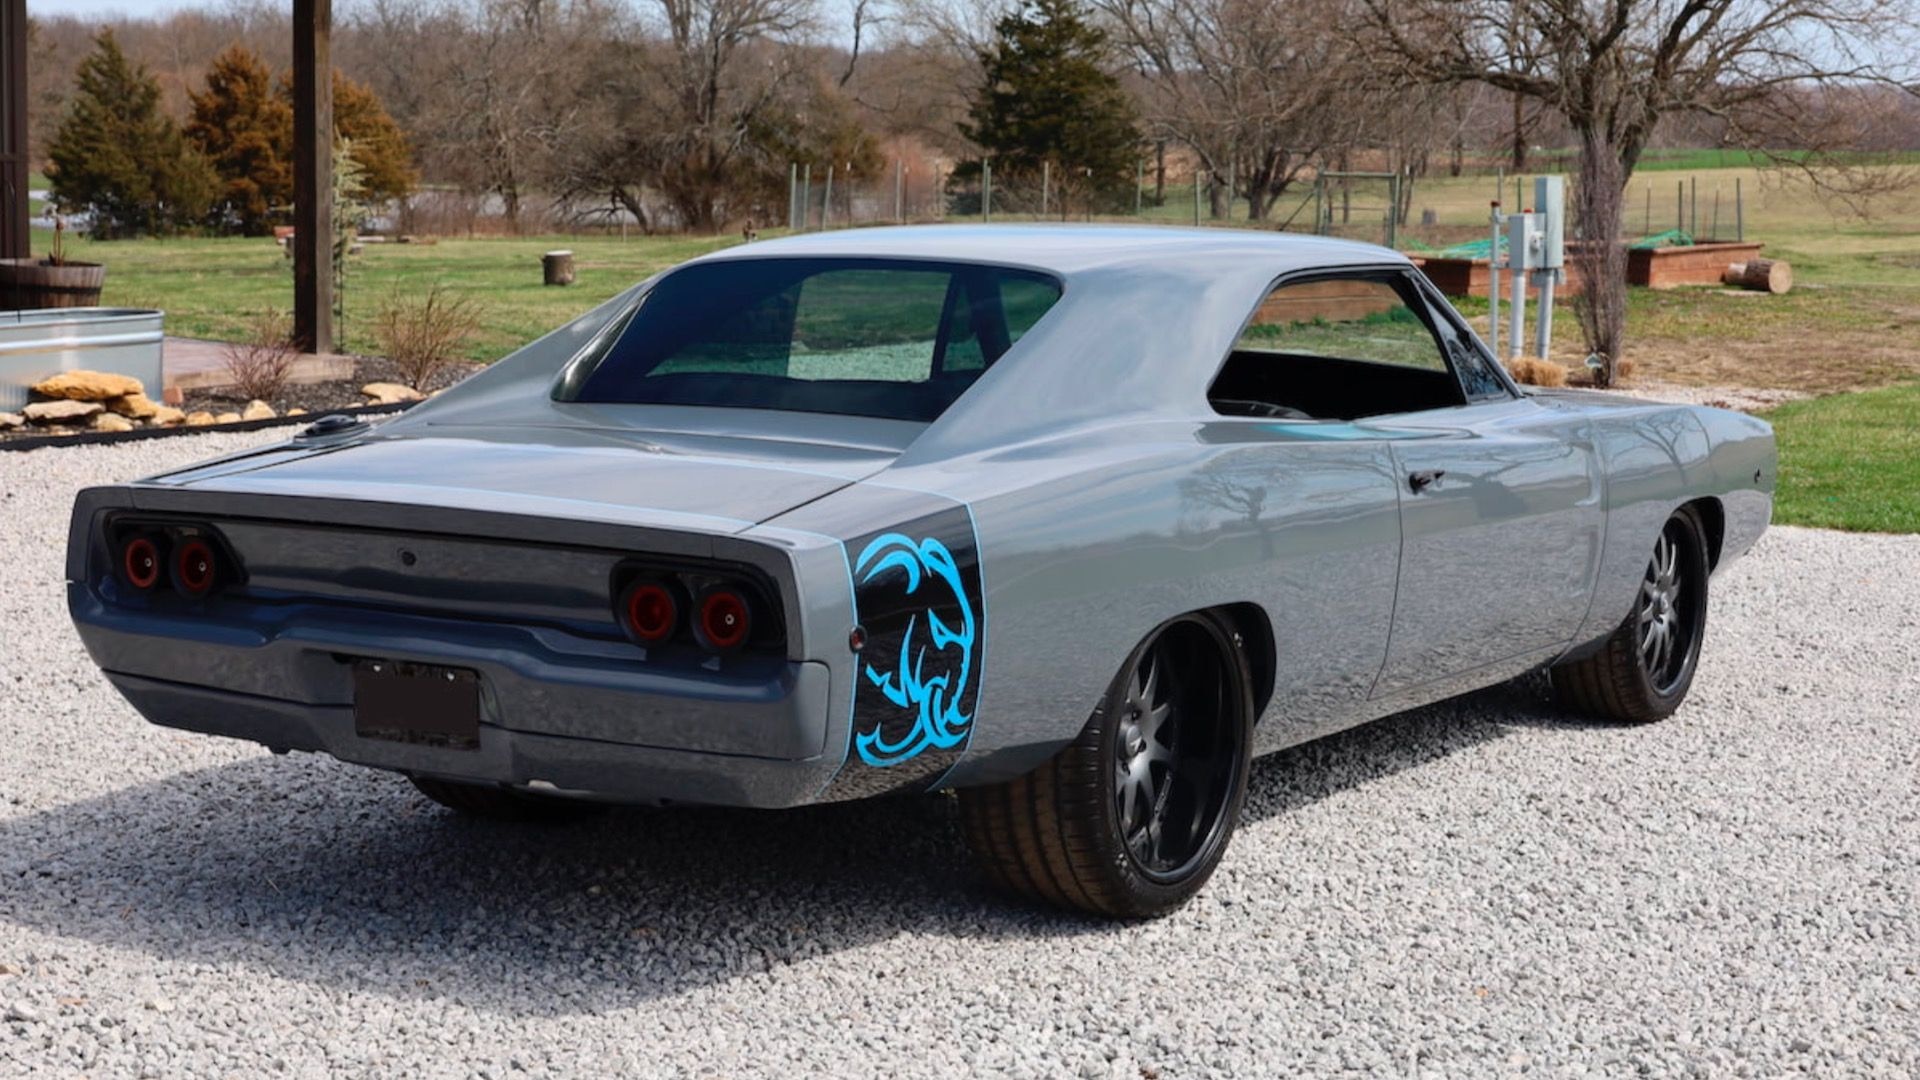 1968 Dodge Charger named "Dumbo" (photo via Mecum Auctions)